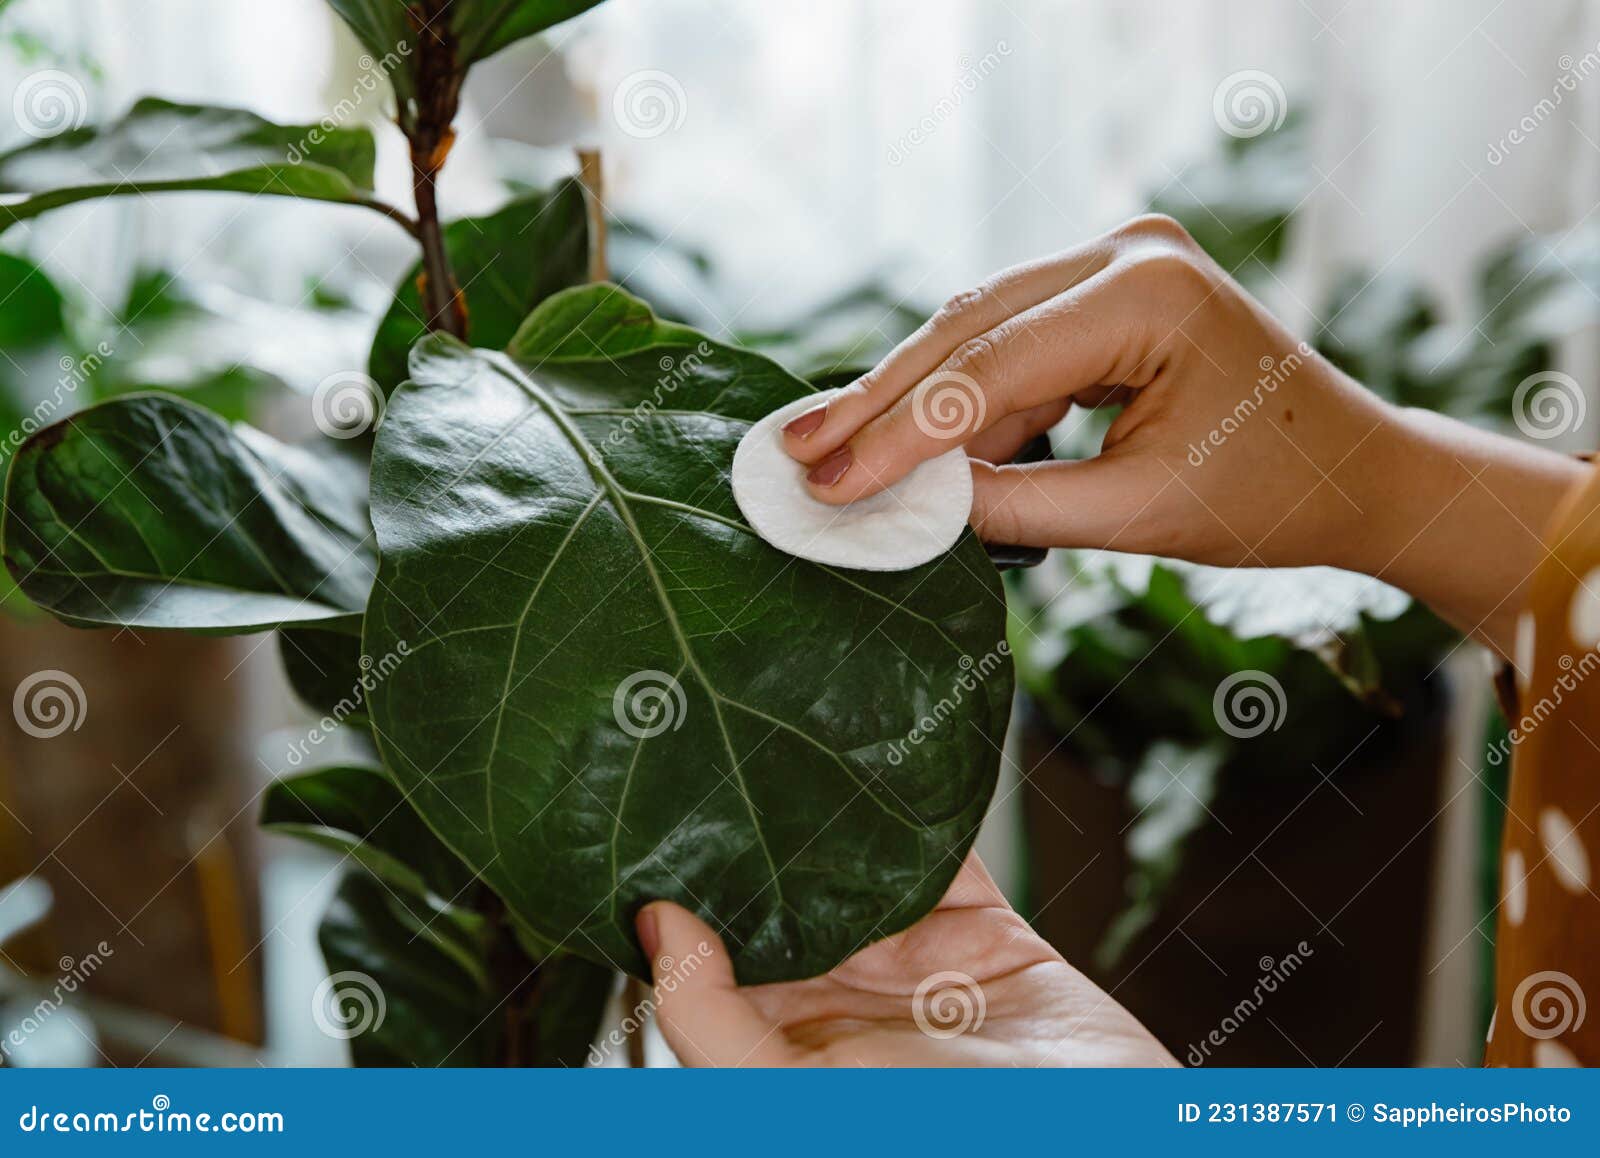 middelalderlig syre At deaktivere Woman Wiping Dust Off Green Leaves of Fiddle Leaf Fig, Ficus Lyrata. Stock  Image - Image of home, growth: 231387571